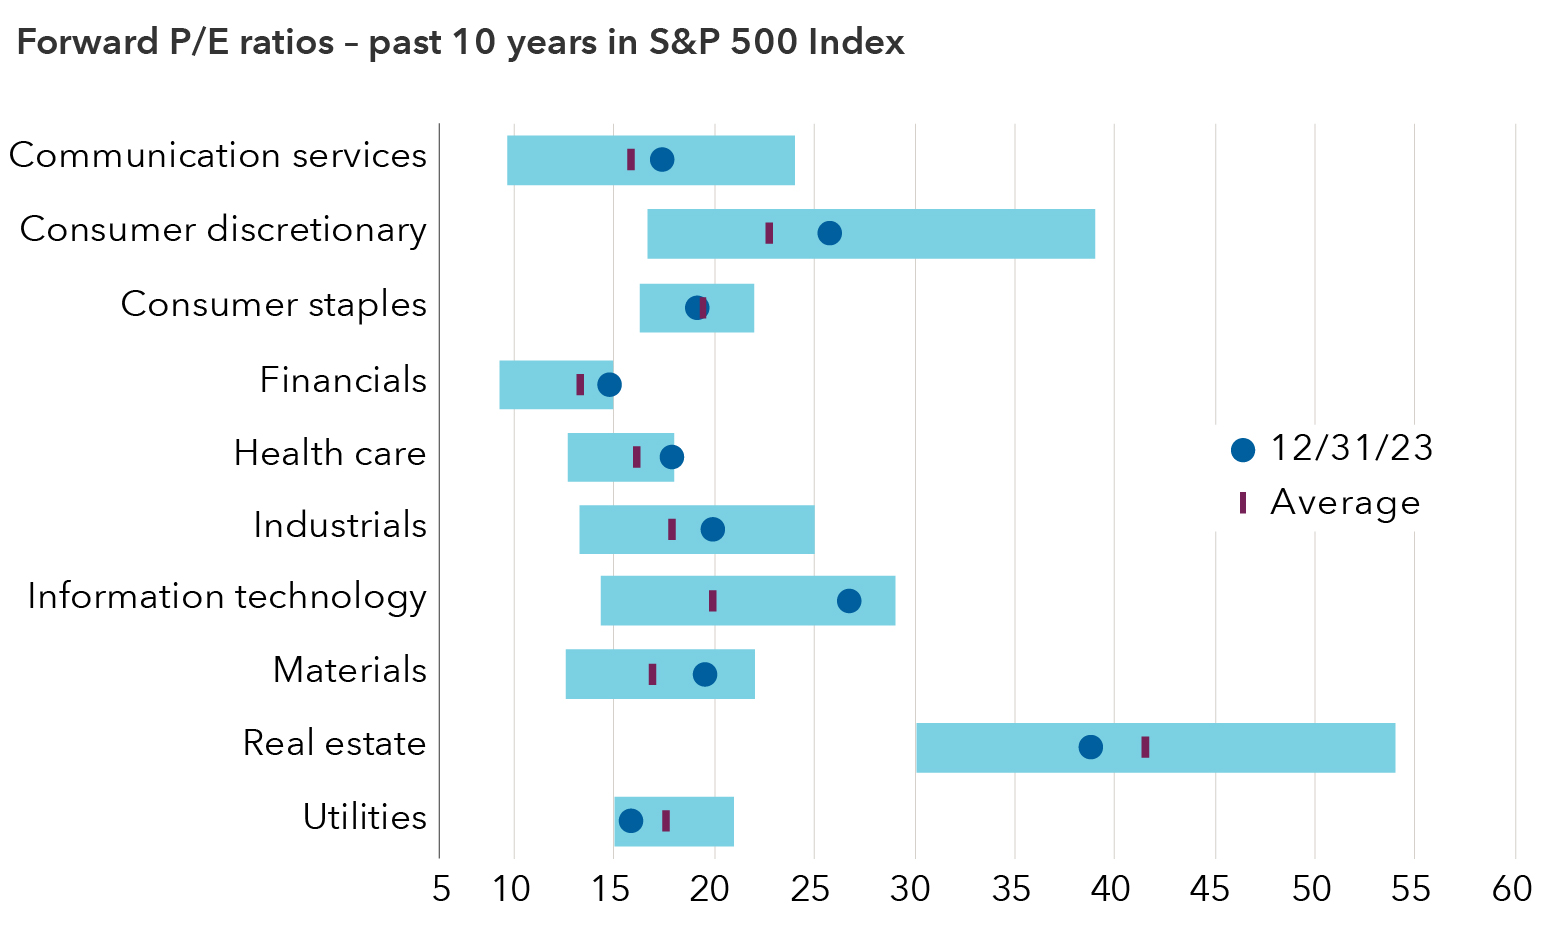 Chart compares the S&P 500 Index current price-to-earnings (P/E) ratios by sector with their respective 10-year average P/E ratios. The information technology sector is trading at 26.67 times earnings versus its 10-year average of 19.84. The consumer discretionary sector is trading at 25.74 times earnings versus its 10-year average of 22.75. The energy sector is trading at 11.08 times earnings versus its 10-year average of 26.65. The communication services sector is trading at 17.33 times earnings versus its 10-year average of 15.82. The consumer staples sector is trading at 19.13 times earnings versus its 10-year average of 19.43. The health care sector is trading at 17.85 times earnings versus its 10-year average of 16.11. The industrials sector is trading at 19.88 times earnings versus its 10-year average of 17.86. The materials sector is trading at 19.53 times earnings versus its 10-year average of 16.89. The real estate sector is trading at 38.77 times earnings versus its 10-year average of 41.49. The utilities sector is trading at 15.77 times earnings versus its 10-year average of 17.59. The financials sector is trading at 14.67 times earnings versus its 10-year average of 13.29. 